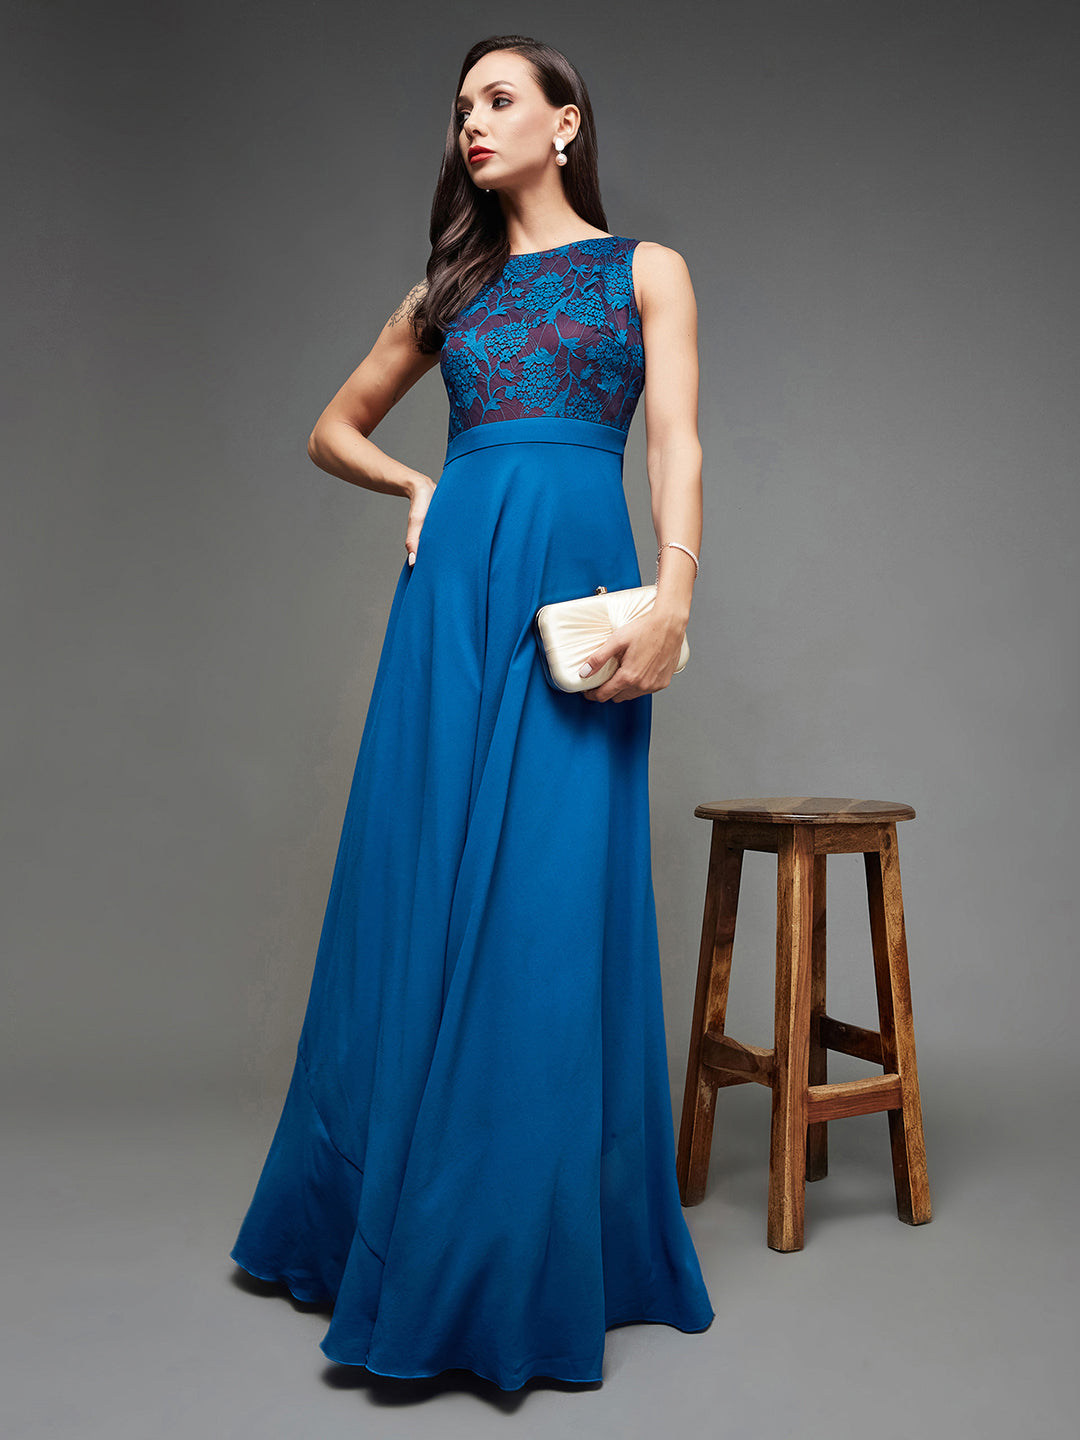 Women's Royal Blue Round Neck Sleeveless Georgette Floral Lace Fit & Flare Maxi Dress